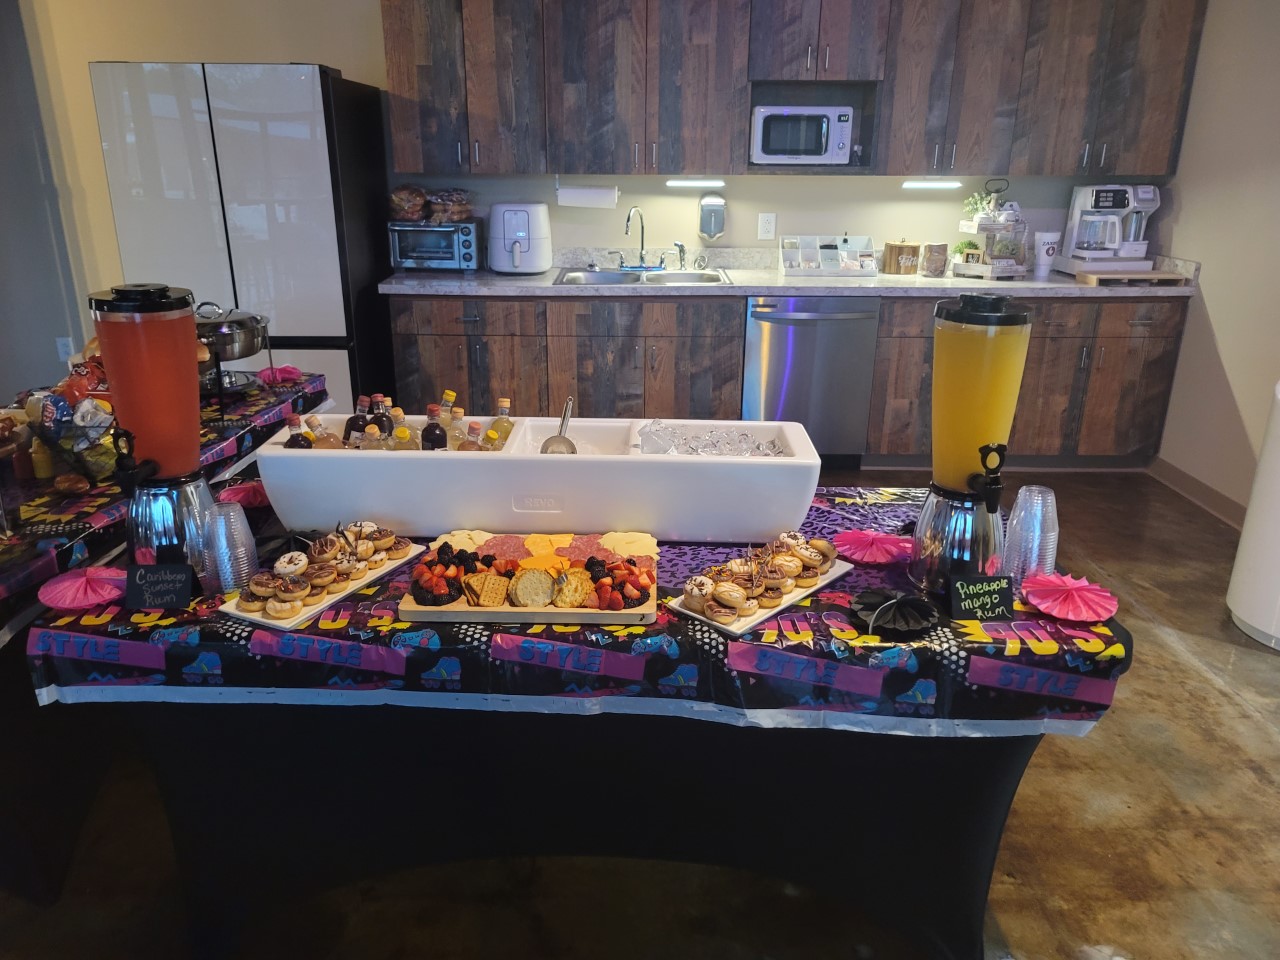 A buffet table with food on it in the kitchen.